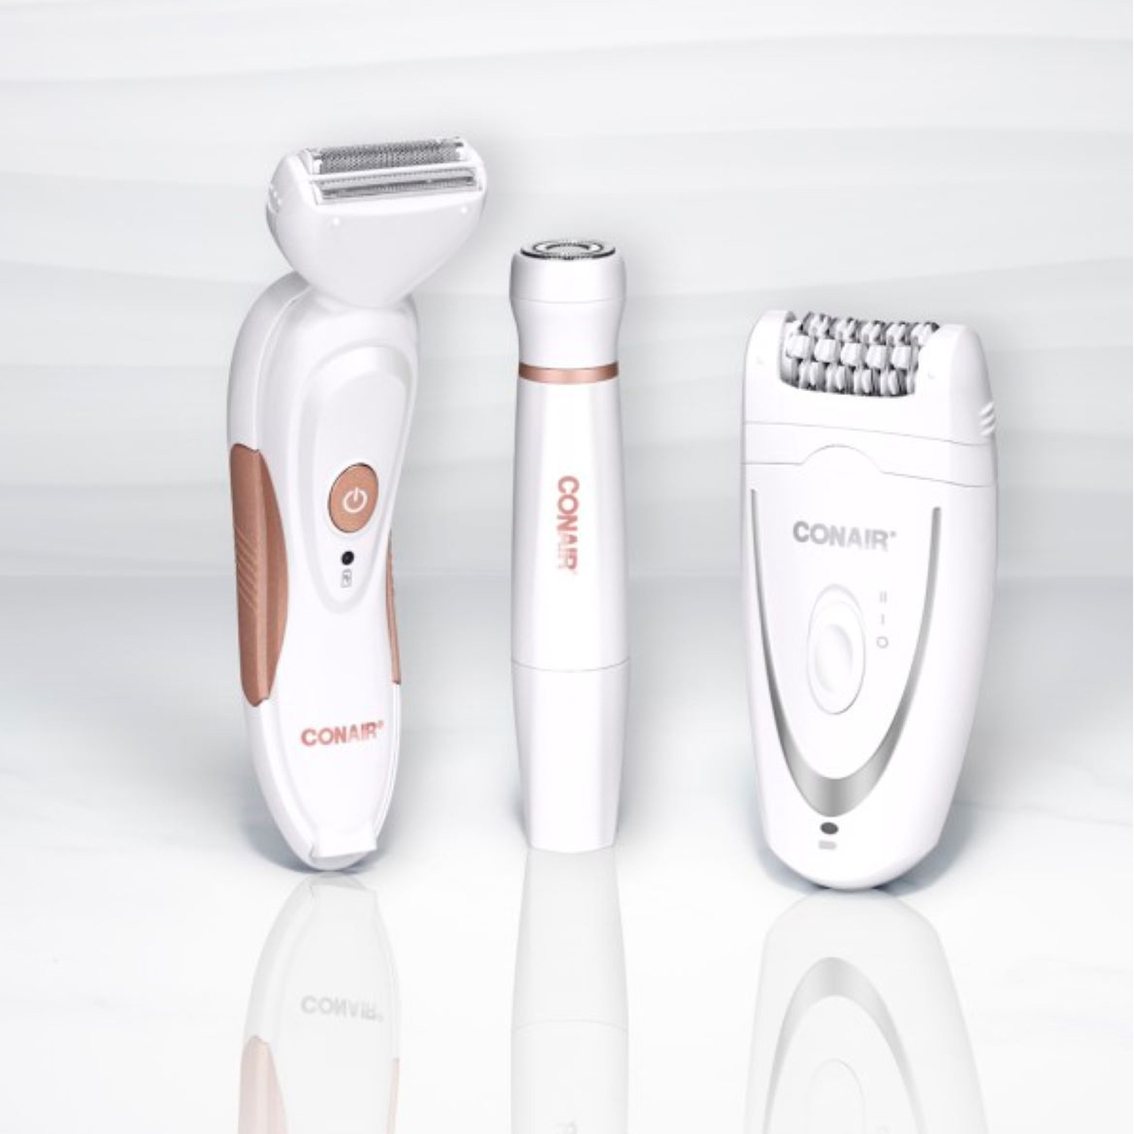 Conair All in One Shave and Trim Cordless and Rechargeable System - Image 8 of 10